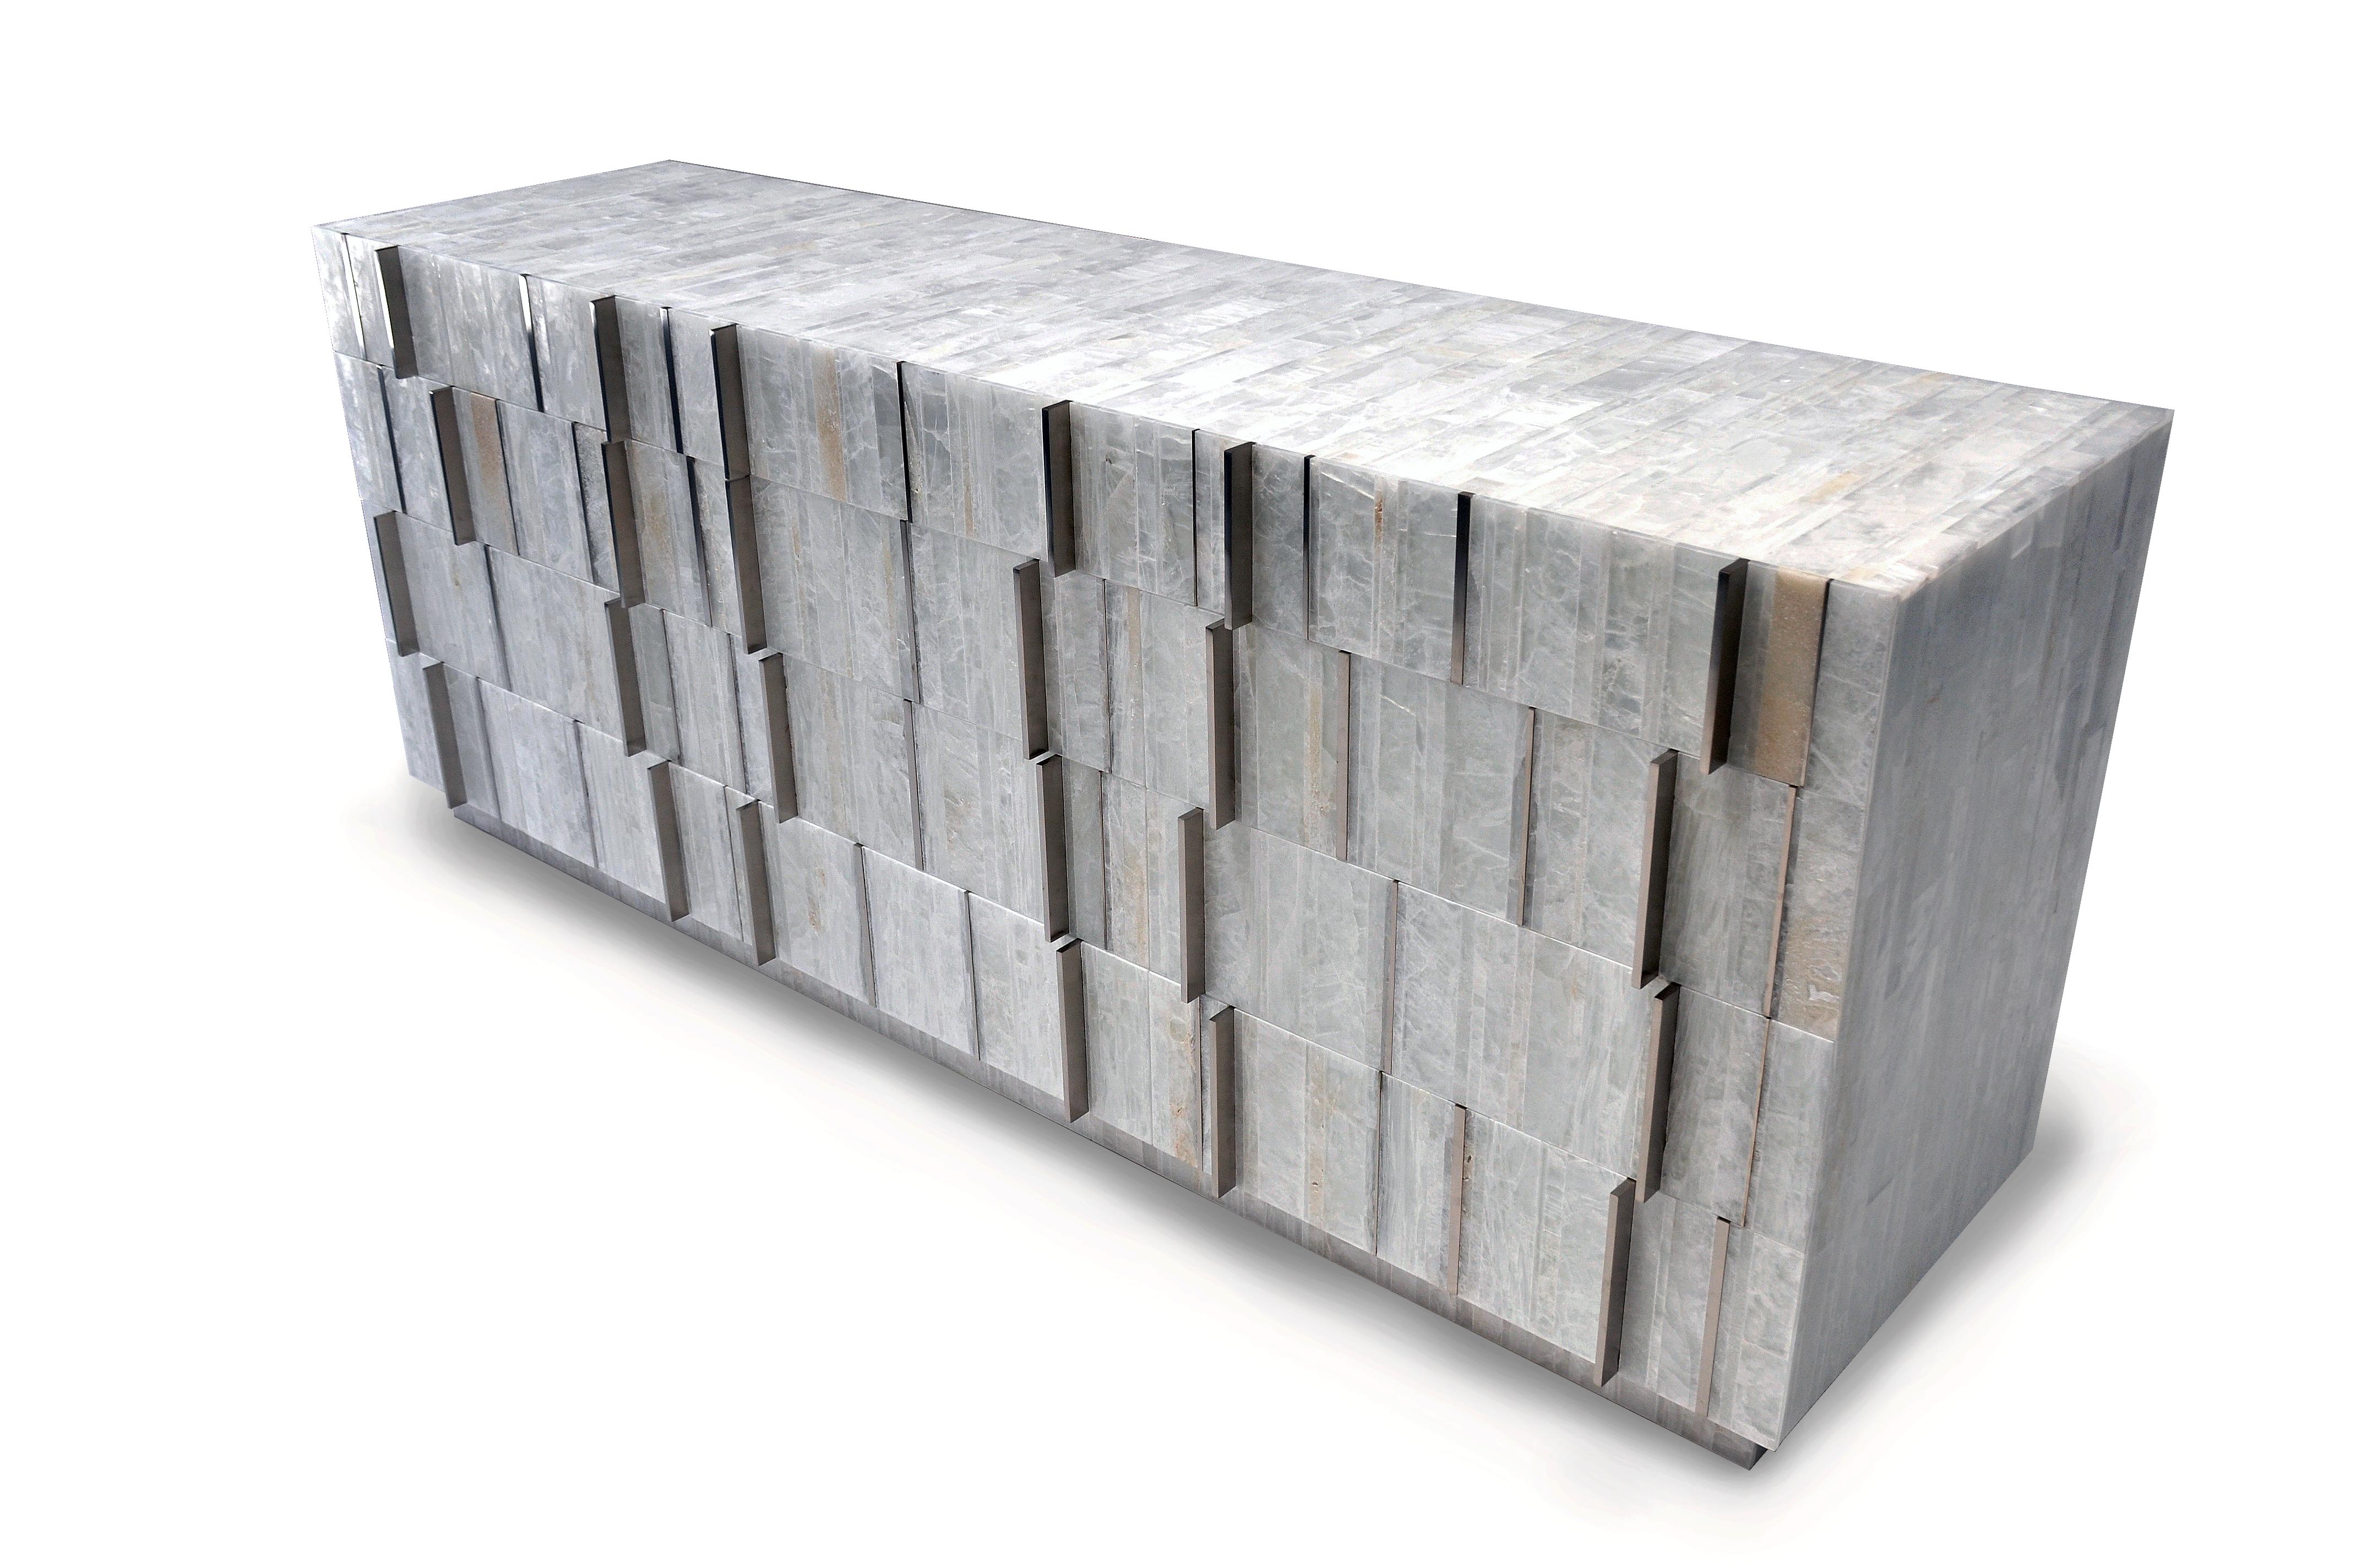 The Sonnet dresser uses the rhythmic patterns of selenite, hand cut and arranged in vertical pattern along with polished metal inlay and handles to create a beautiful luxurious statement piece. Selenite is a naturally occurring crystalline form of